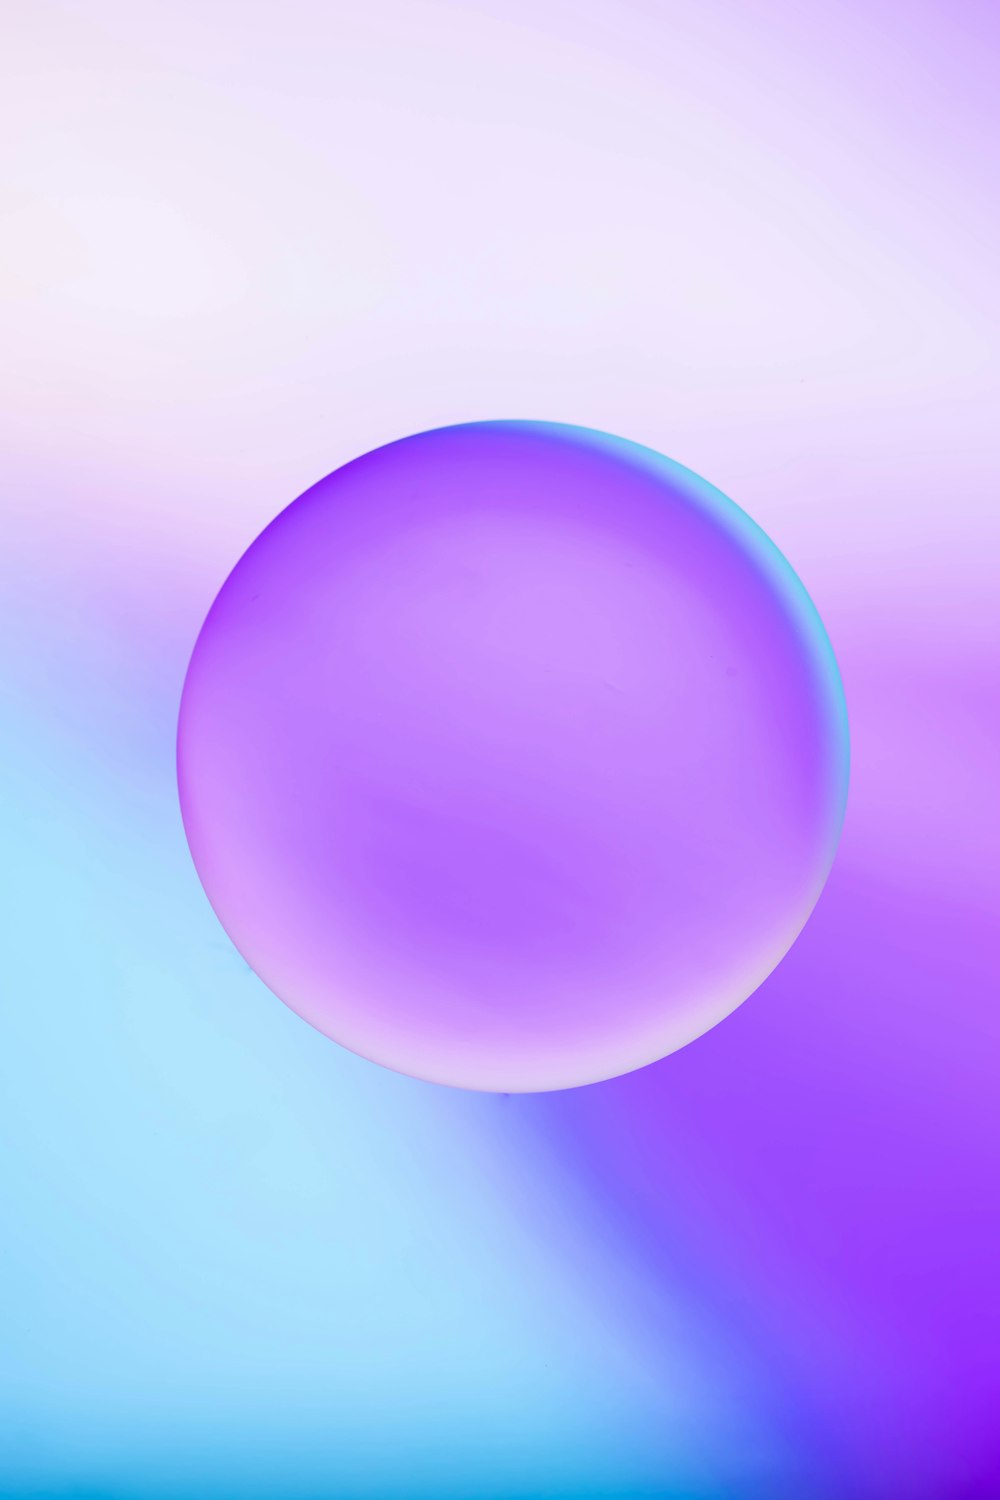 a blurry image of a blue and purple object